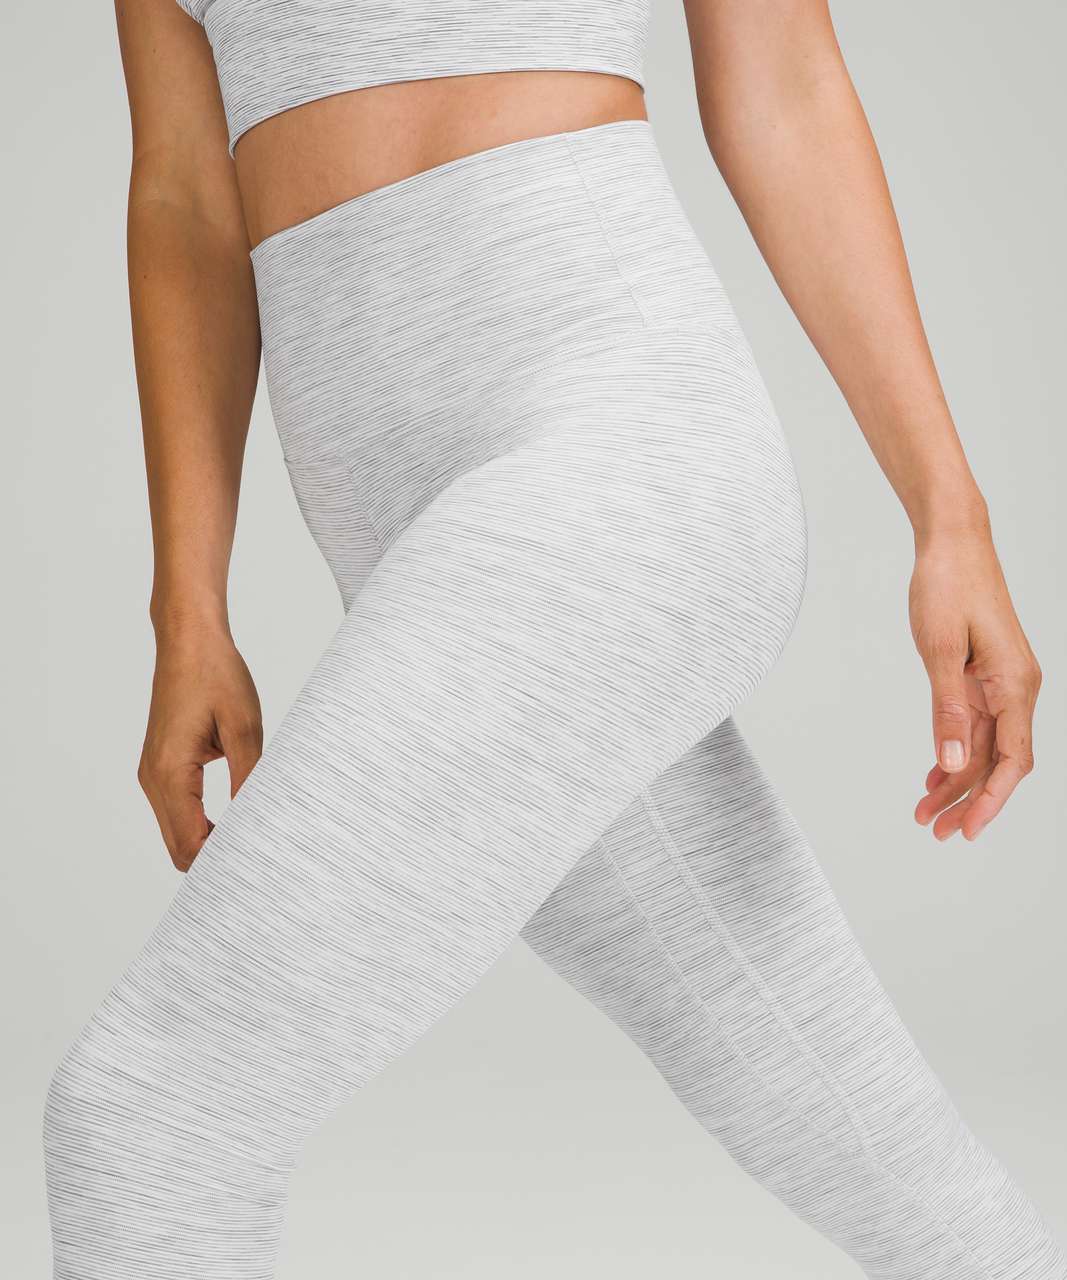 Lululemon Align High-Rise Pant 28" - Wee Are From Space Nimbus Battleship